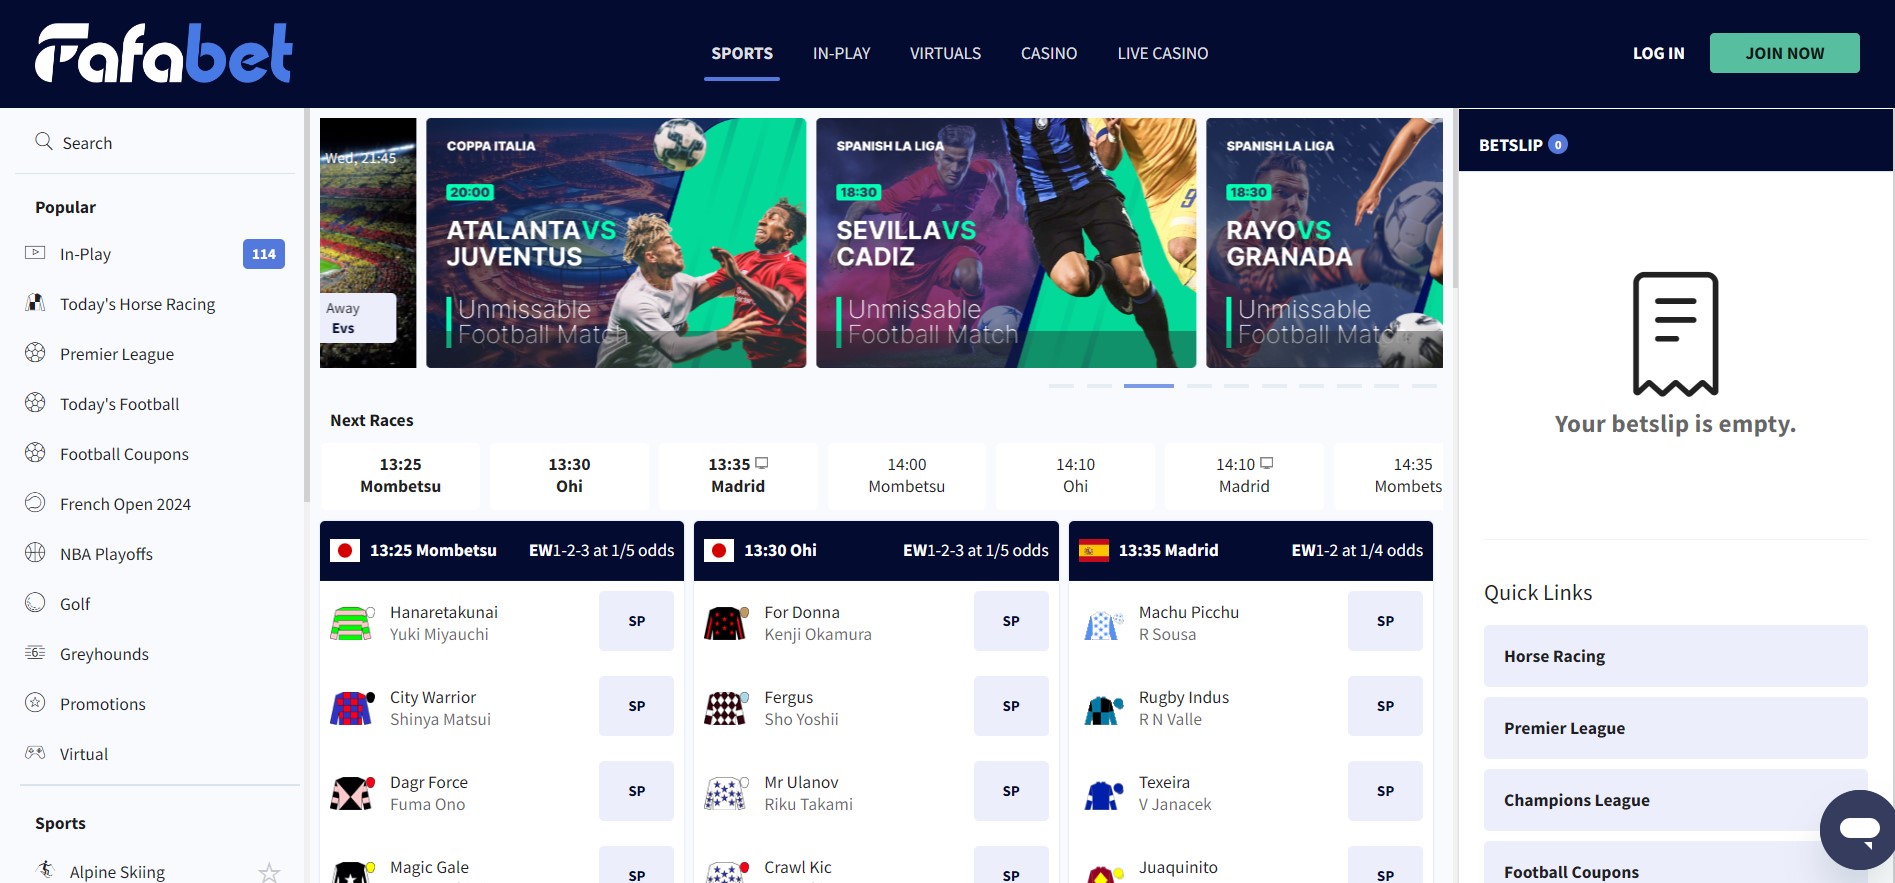 Fafabet Sports Betting Review